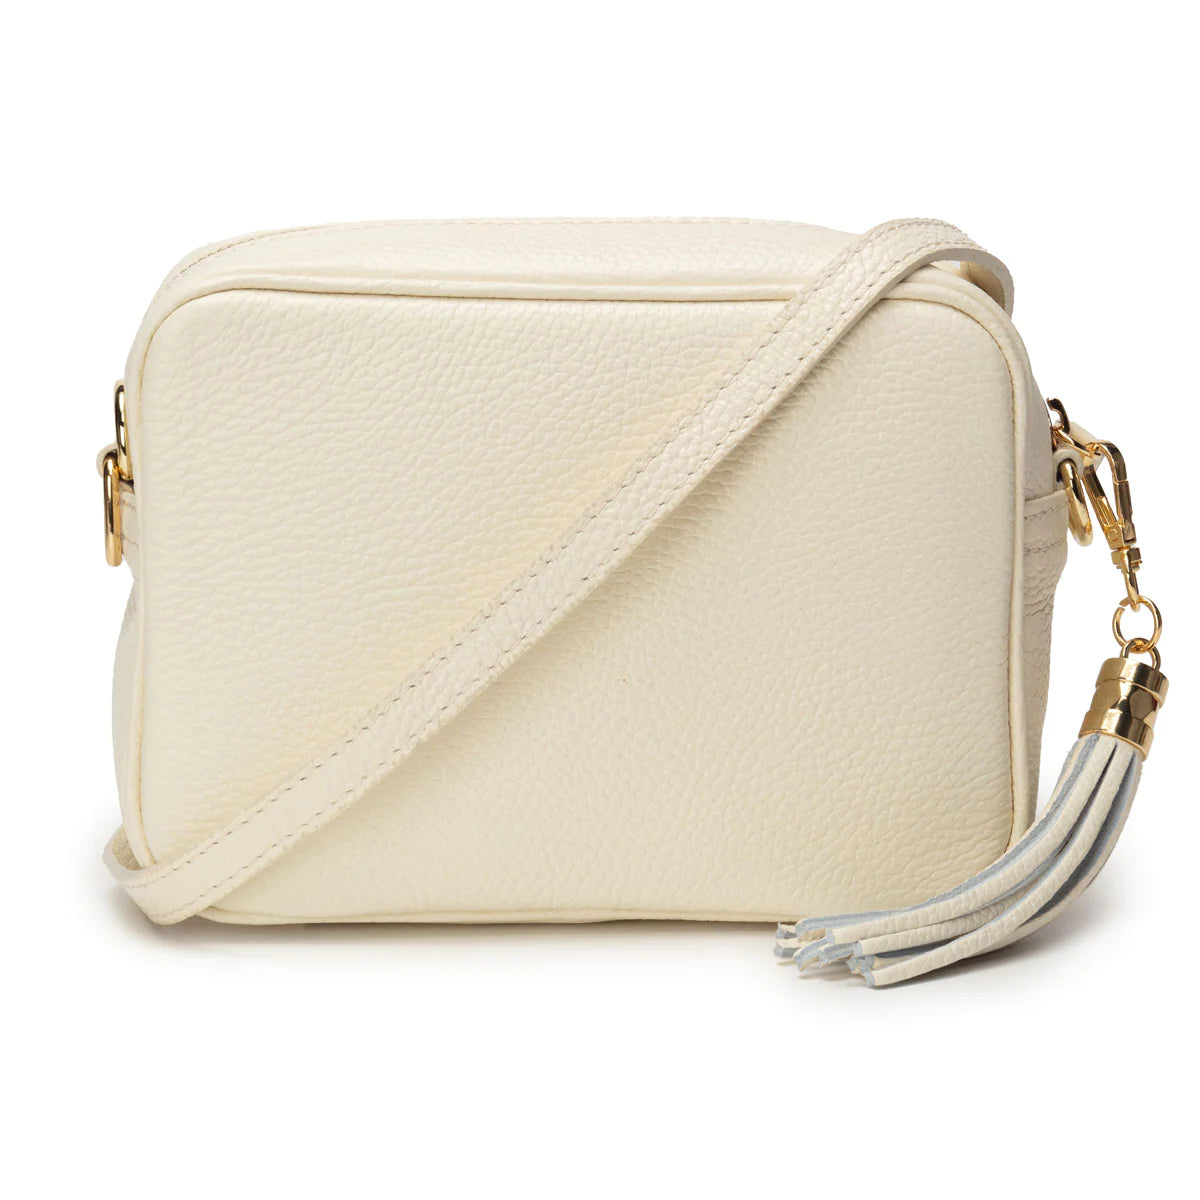 Elie Beaumont - Tassle Cream Bag [Extra Strap included]